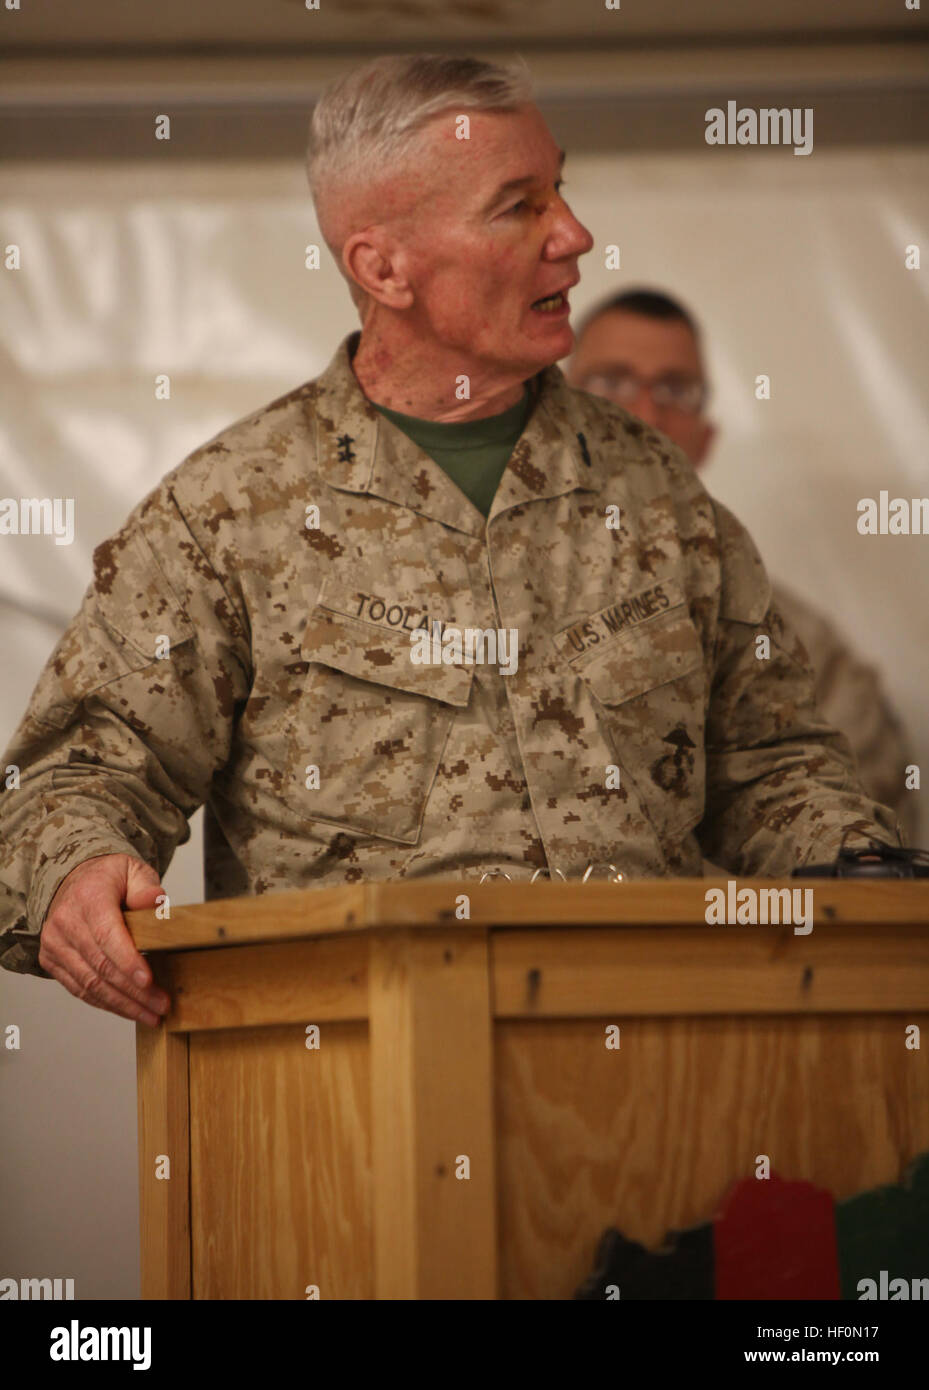 Maj. Gen. John A. Toolan, commanding general Regional Command Southwest and II Marine Expeditionary Force (Forward), addresses the students of the Explosives Hazard Reduction Course during his speech at the graduation ceremony, Feb. 2, at the Joint Sustainment Academy Southwest.  The course is one of many offered by U.S. and coalition forces at the academy, which teaches everything from literacy to tactical leadership. Explosive Hazard Reduction Course graduates at Helmand academy 120202-M-GF563-036 Stock Photo